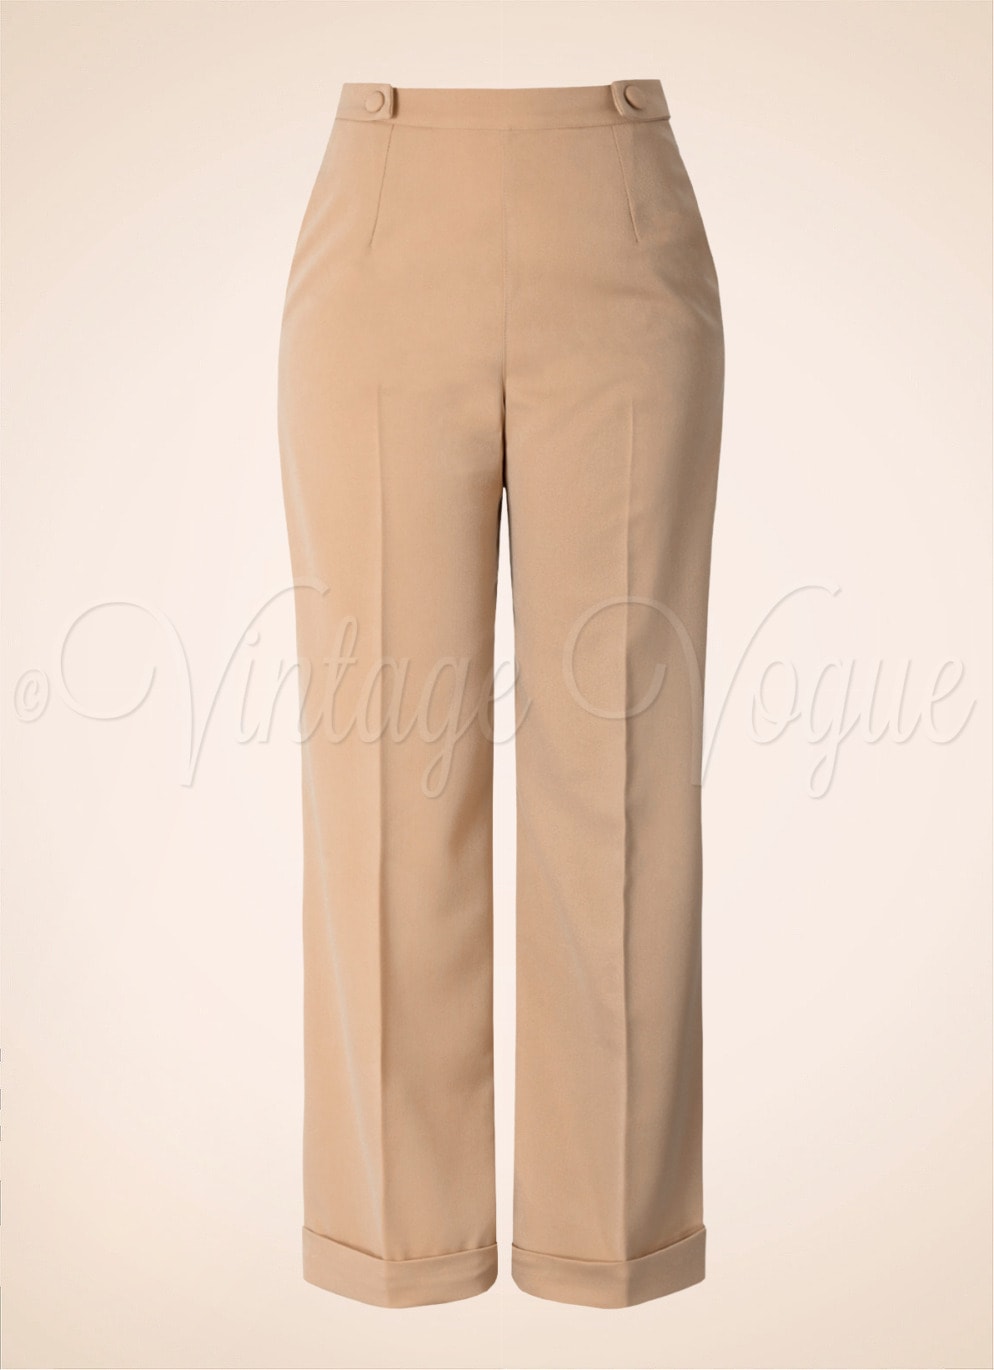 Banned 40er Jahre Retro High Waist Marlene Stoff Hose Party On Trousers in Sand Beige